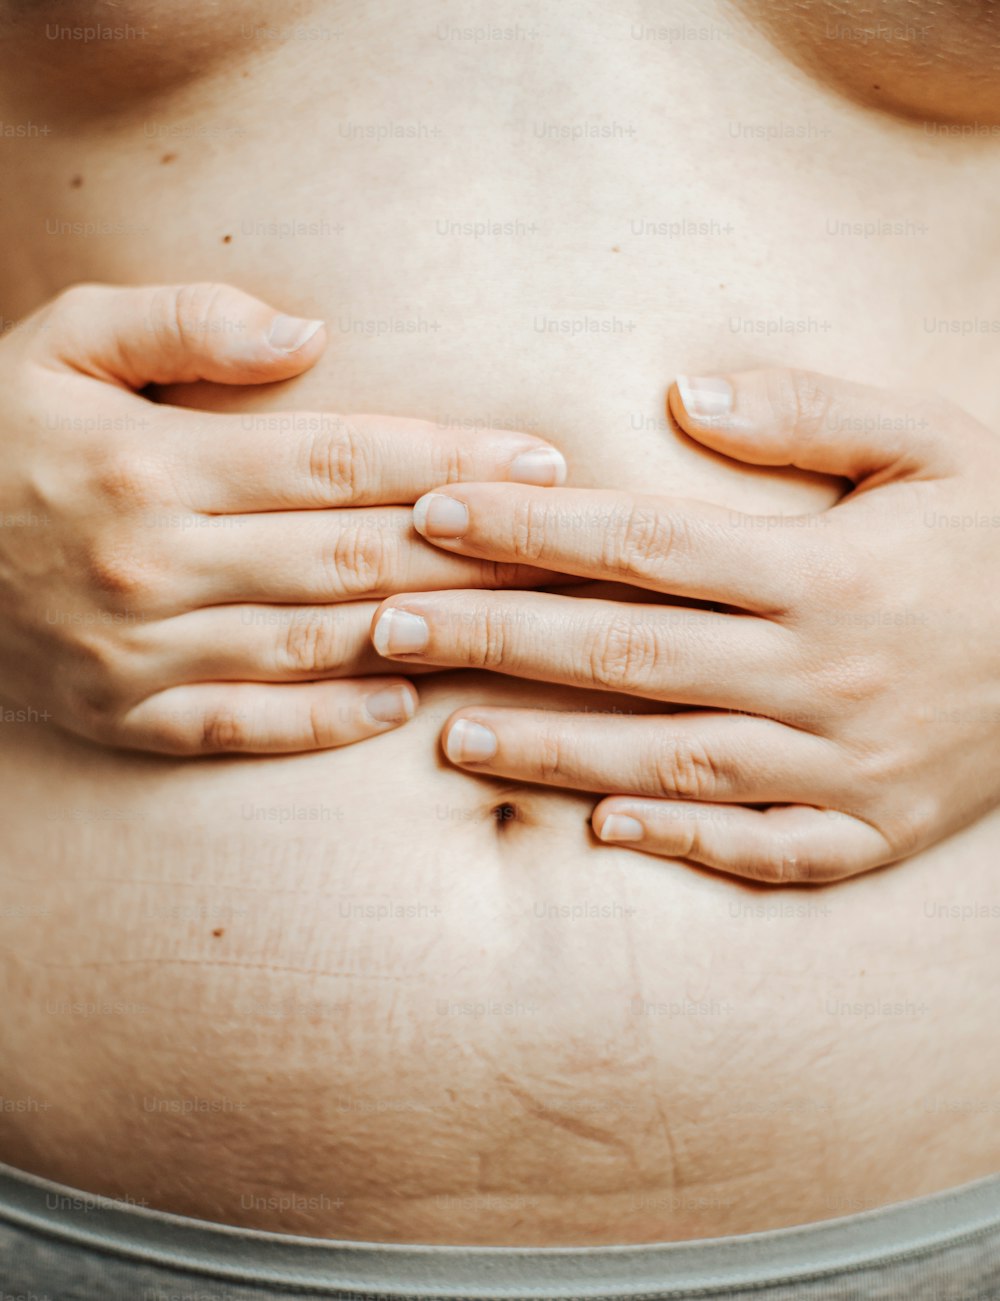 a close up of a woman's stomach with her hands on her stomach